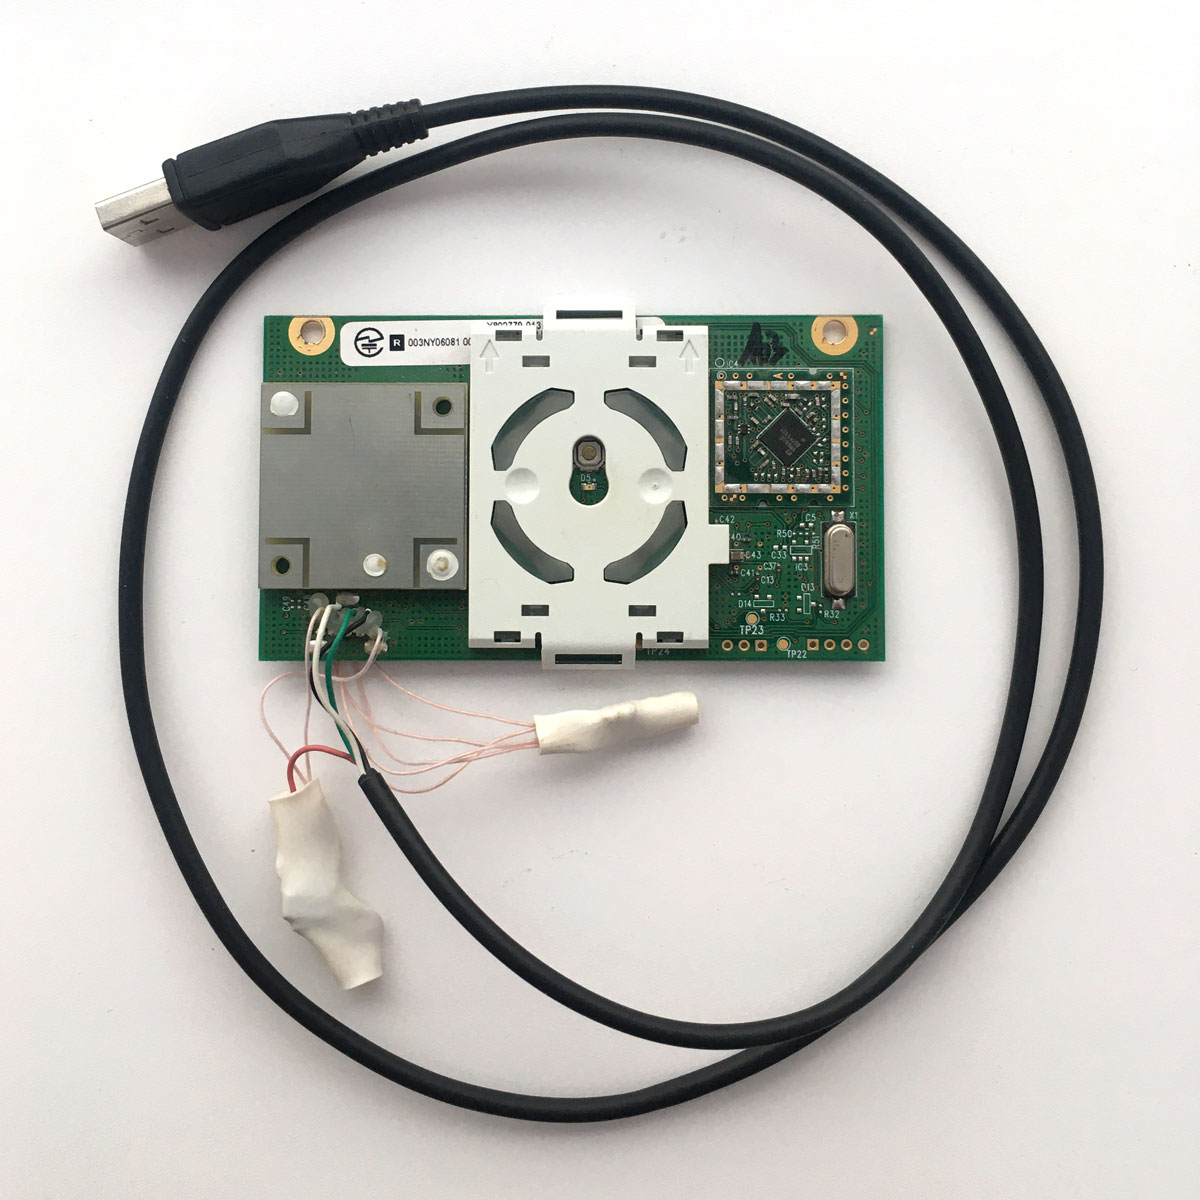 Building a Wireless Receiver for Xbox 360 Controllers From a